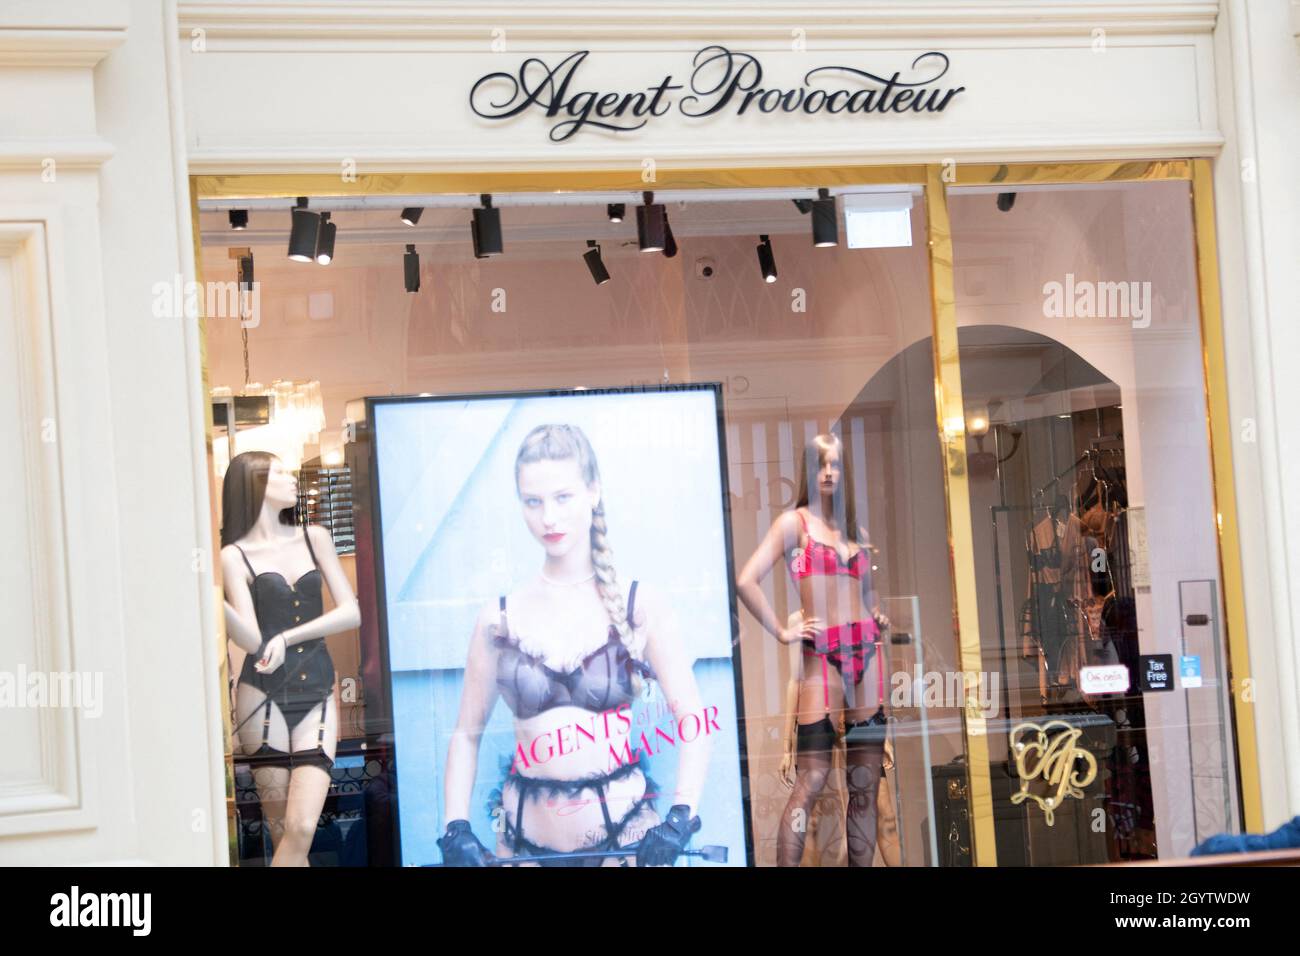 Agent Provocateur Shop High Resolution Stock Photography and Images - Alamy